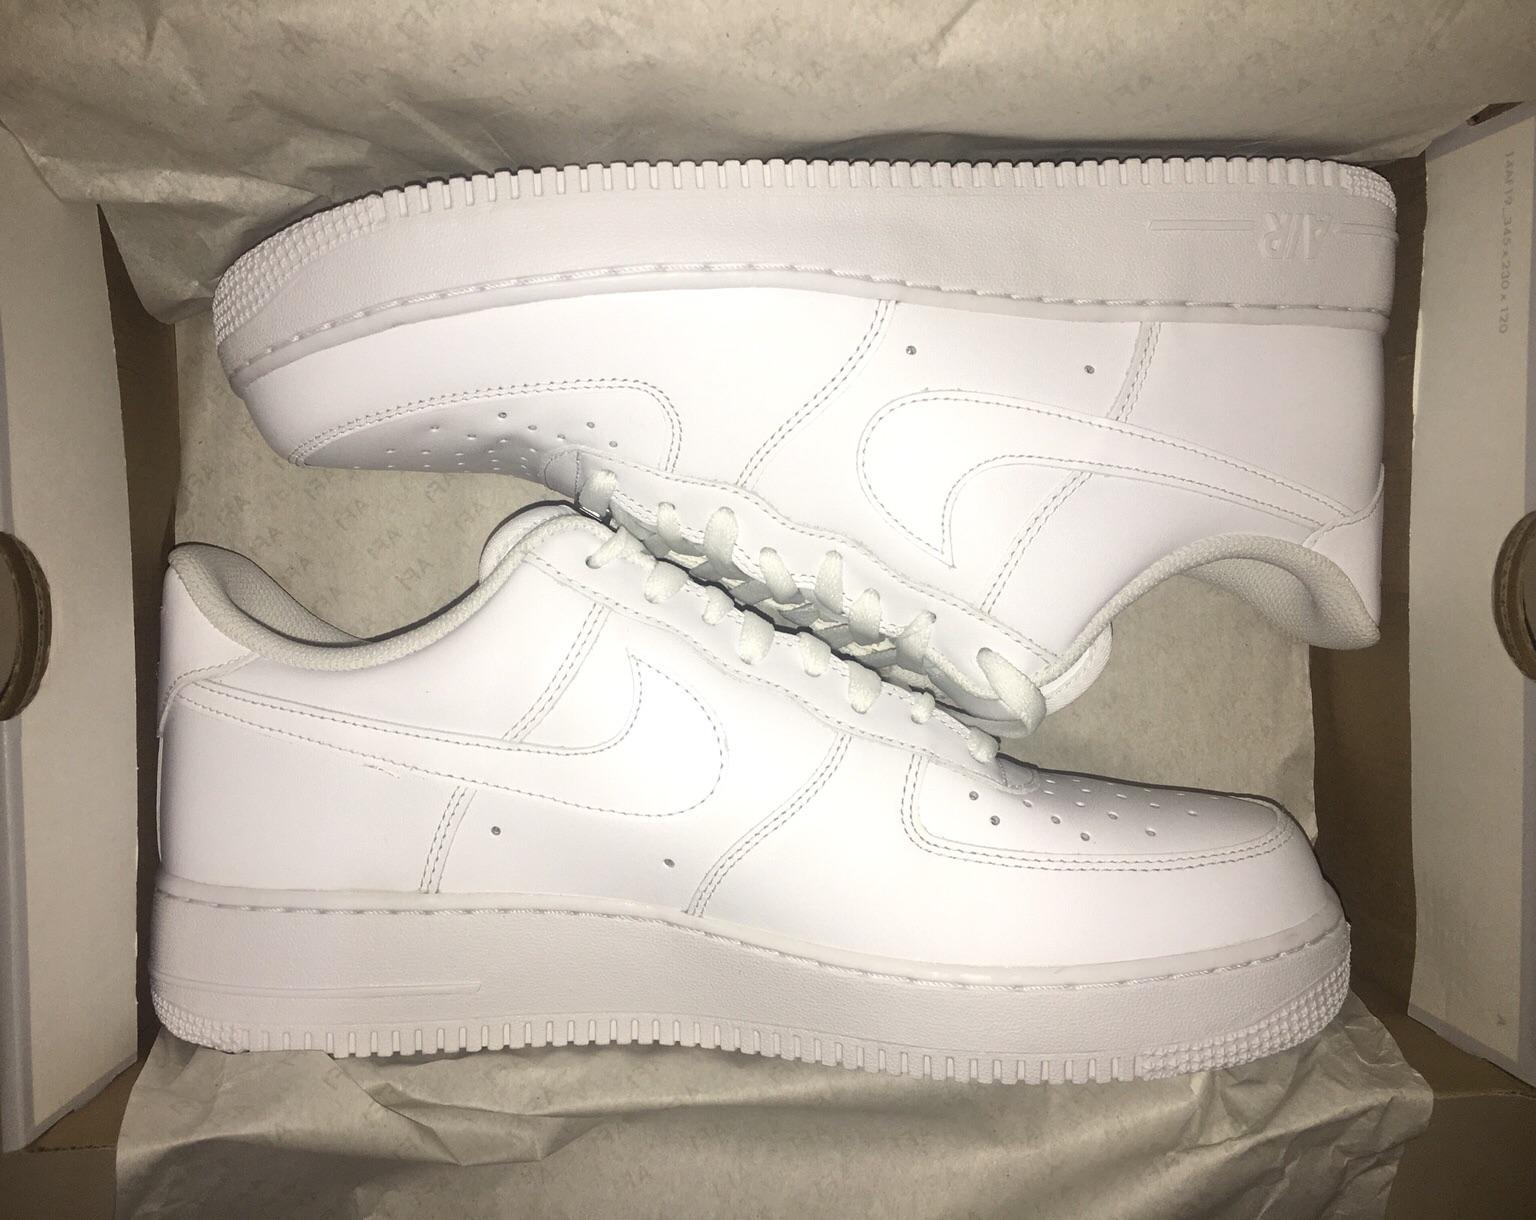 Nike Air Force 1 numeri 45,45.5 e 46 in 81025 Marcianise for €75.00 for  sale | Shpock